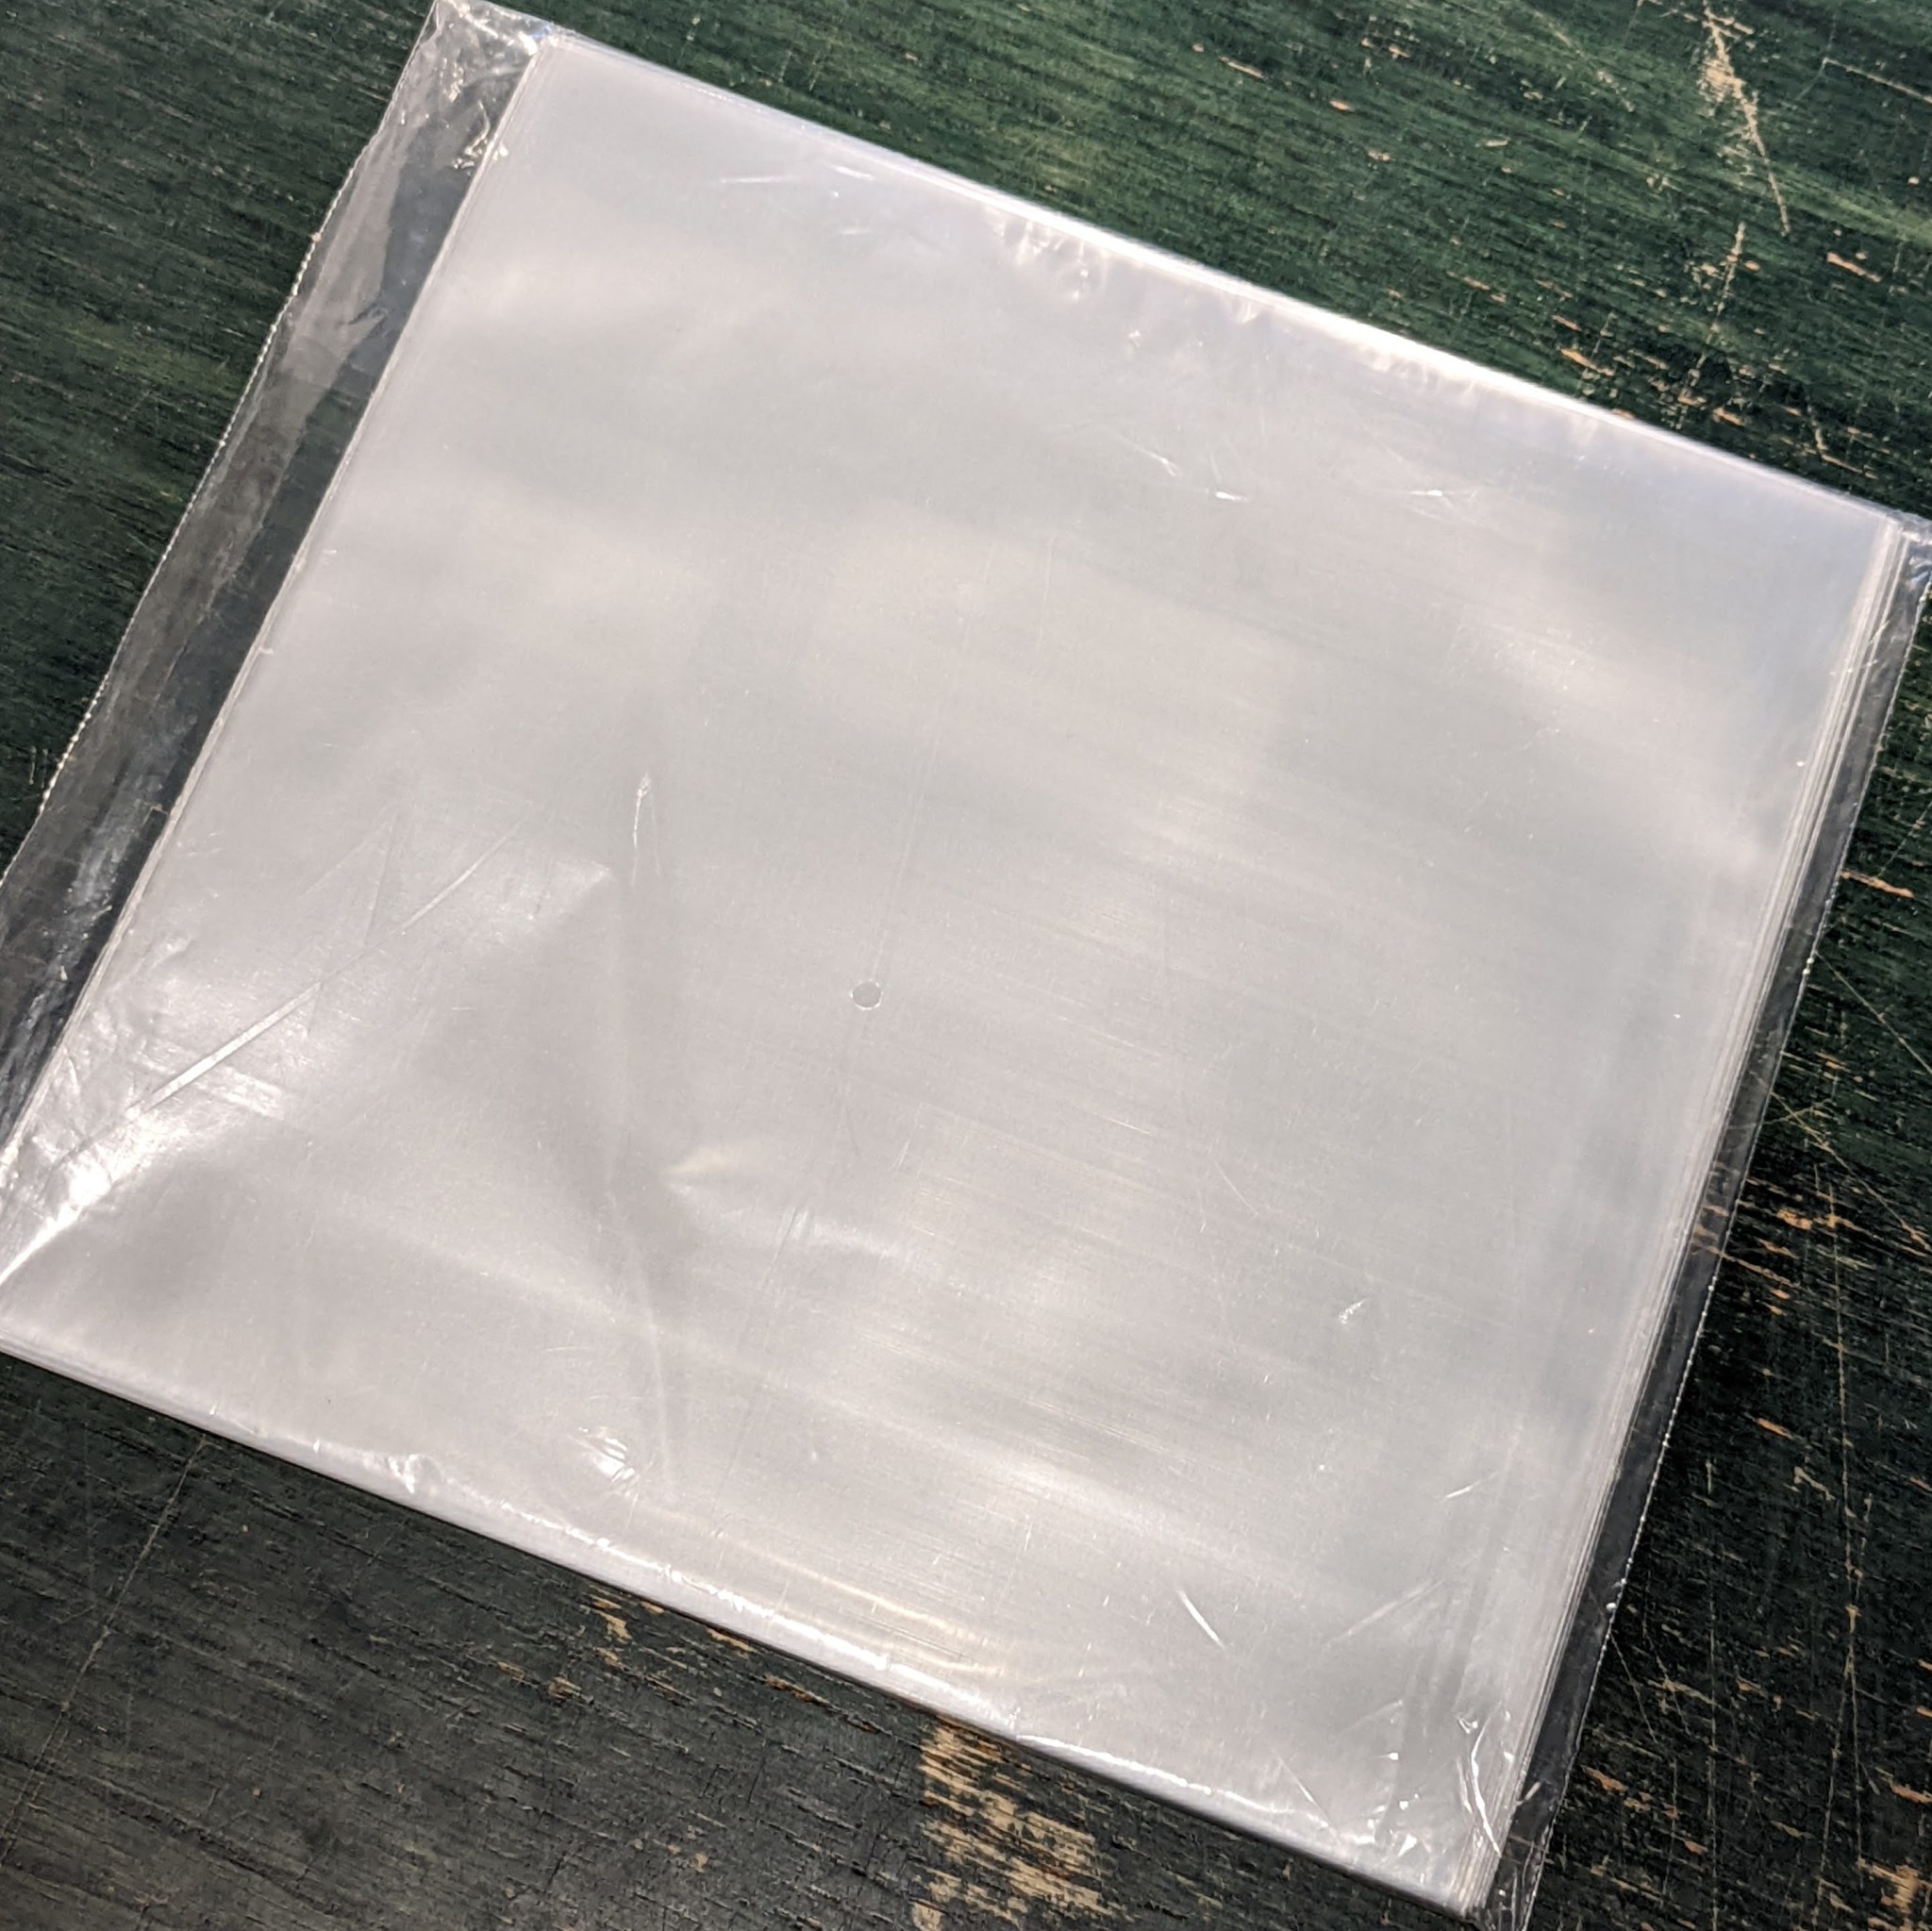 Vinyl Provisions Clear Outer Record Sleeves - 3.0 mil Polyethylene